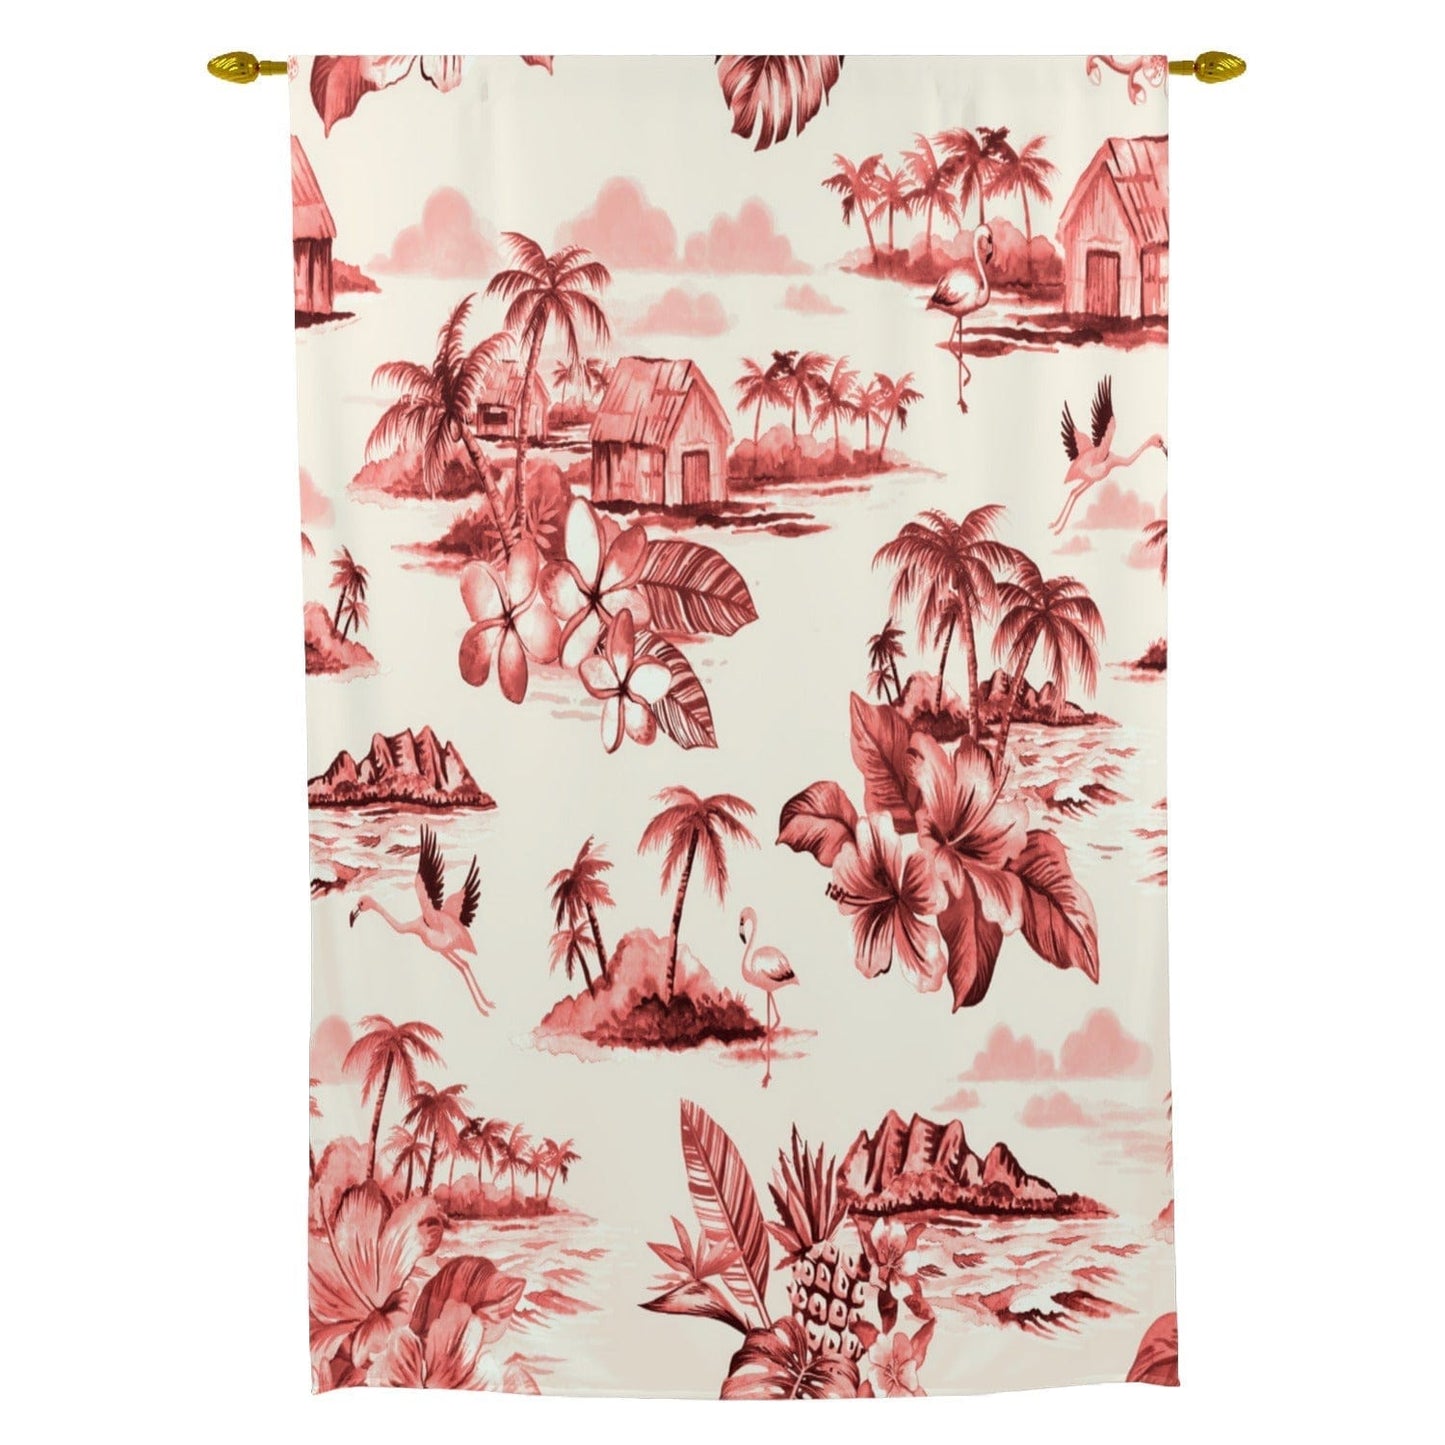 kate-mcenroe-nyc Roll-Up Curtains in Vintage Hawaiian Tropical Island Scenes Curtains 55752